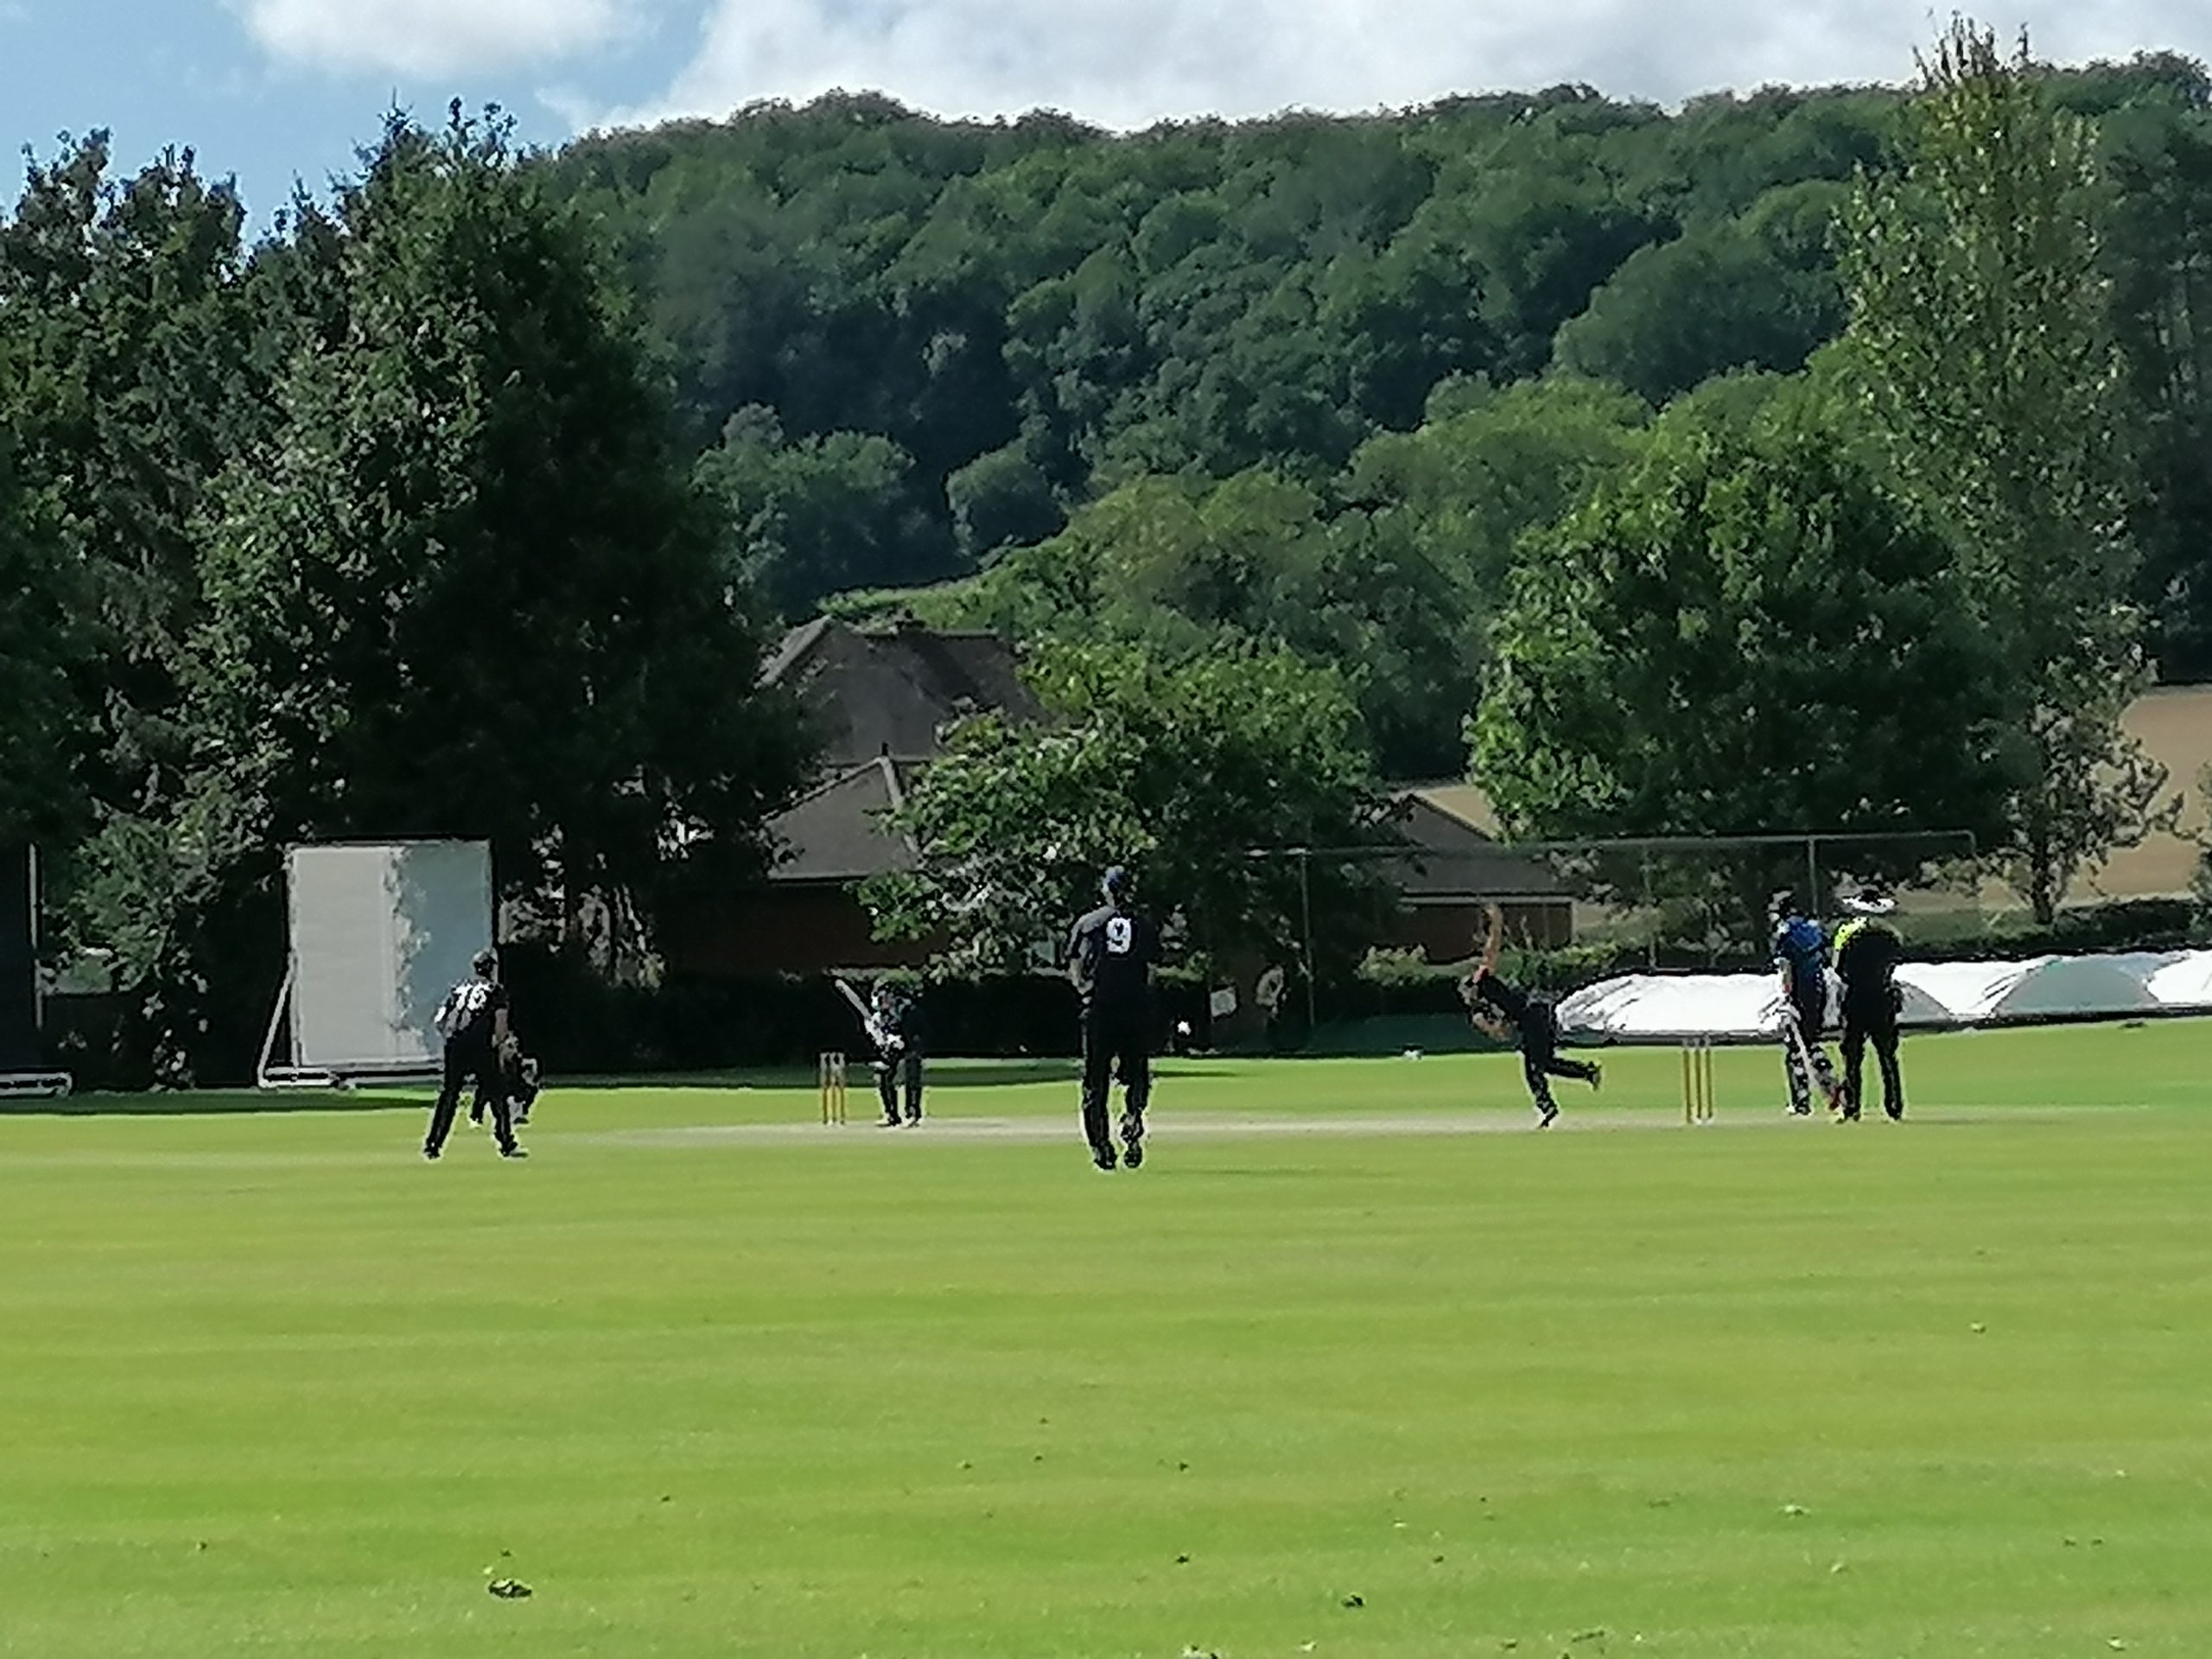 CRICKET | Herefordshire CCC look to build on Devon victory when Cornwall visit Eastnor this weekend